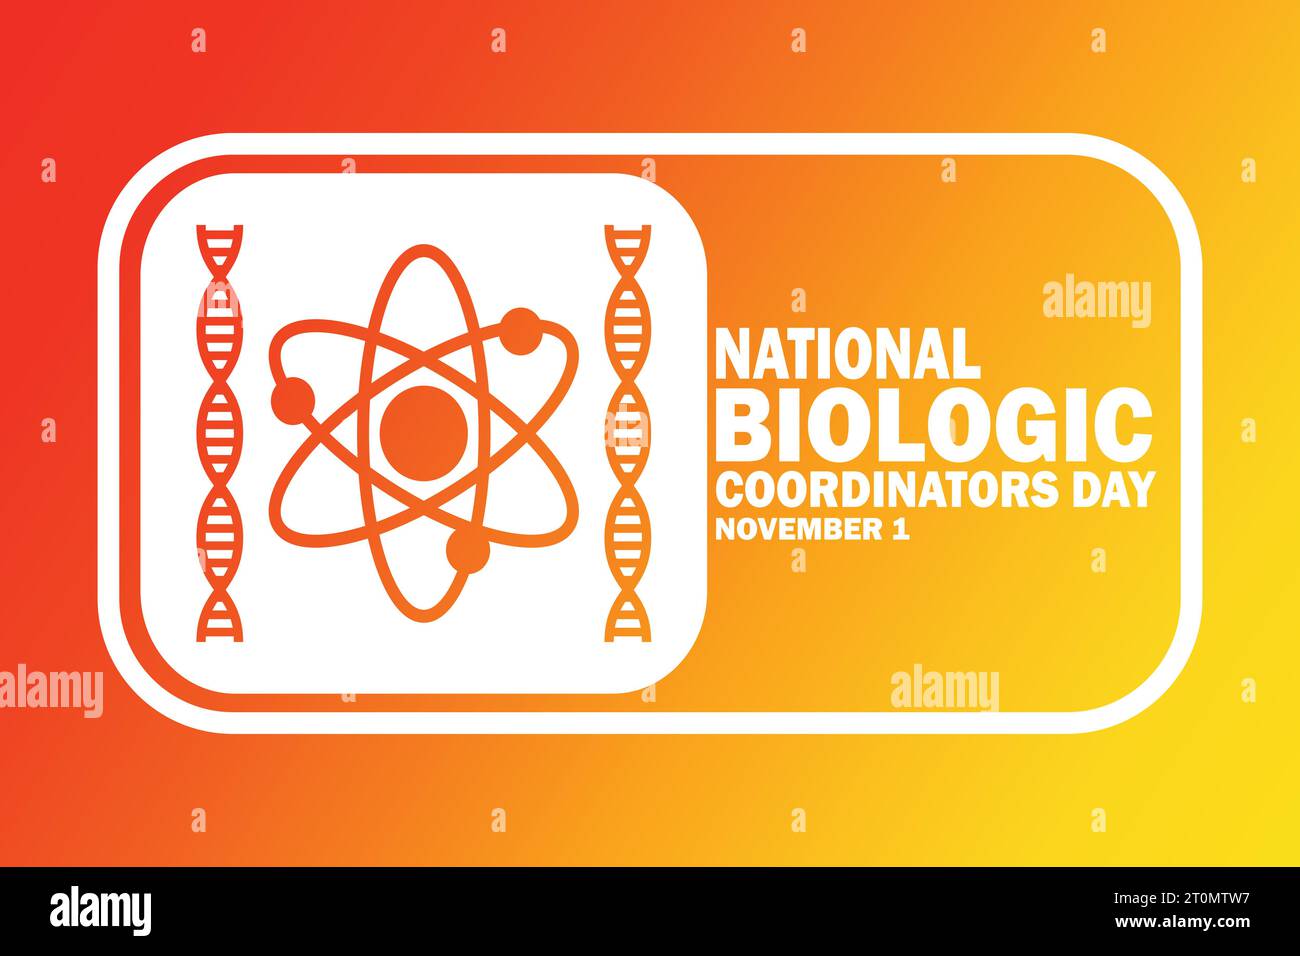 National Biologic Coordinators Day Vector Template Design Illustration. November 1. Suitable for greeting card, poster and banner Stock Vector